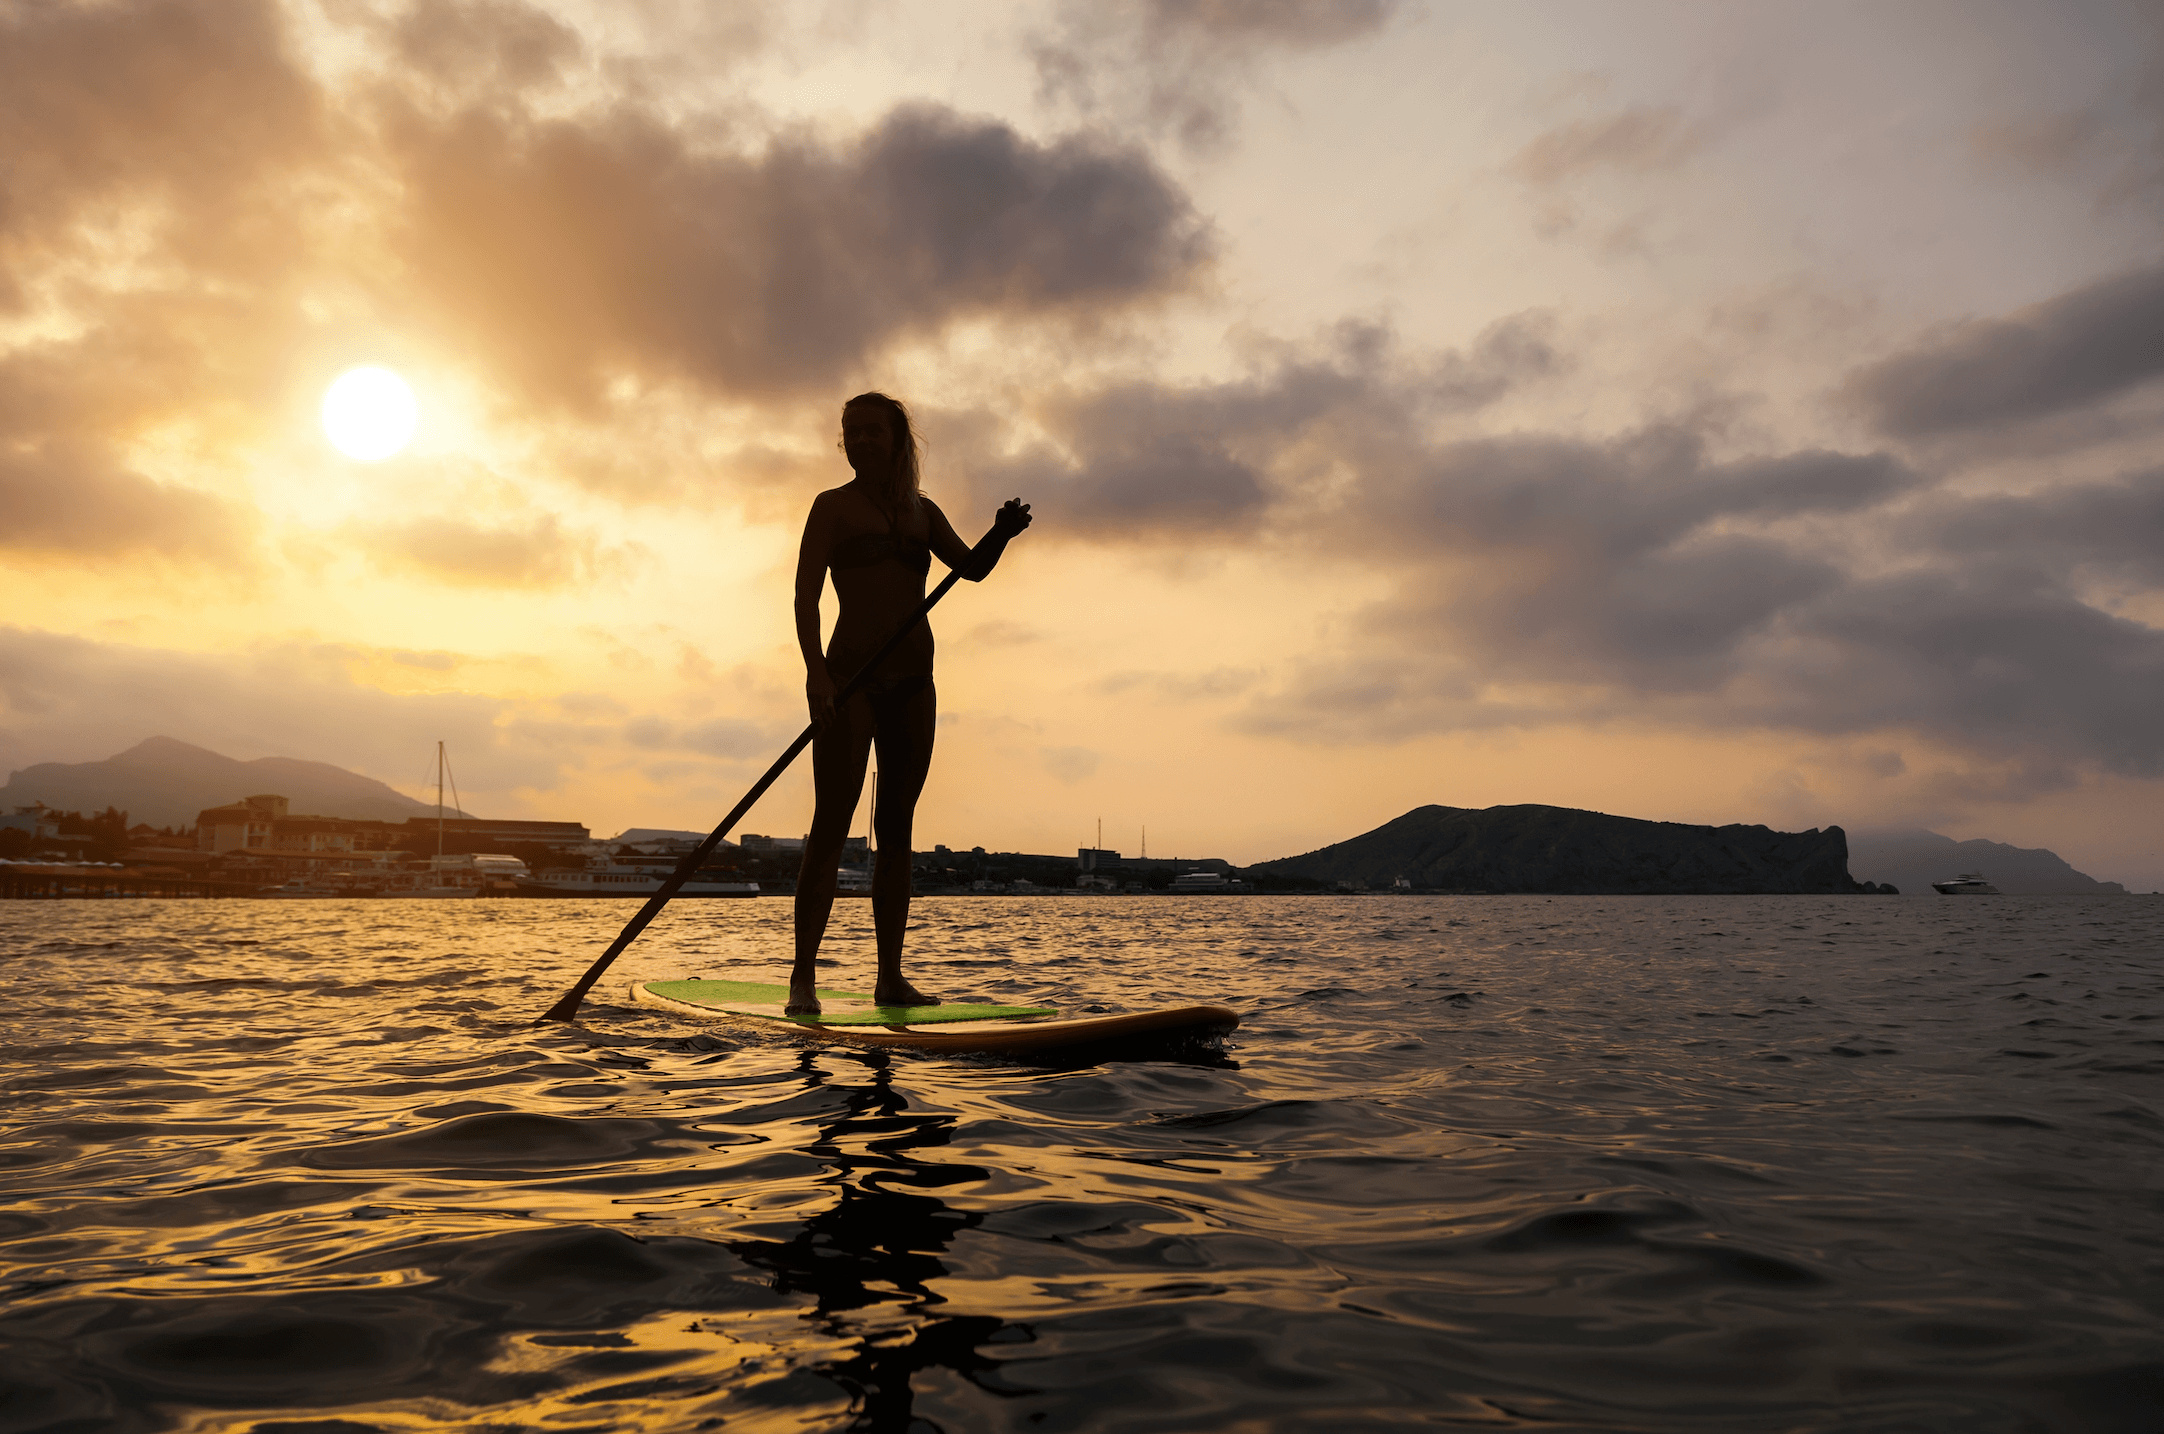 Paddleboarding best paddle boards, Awesome workouts, Epic review, 2022, 2170x1440 HD Desktop